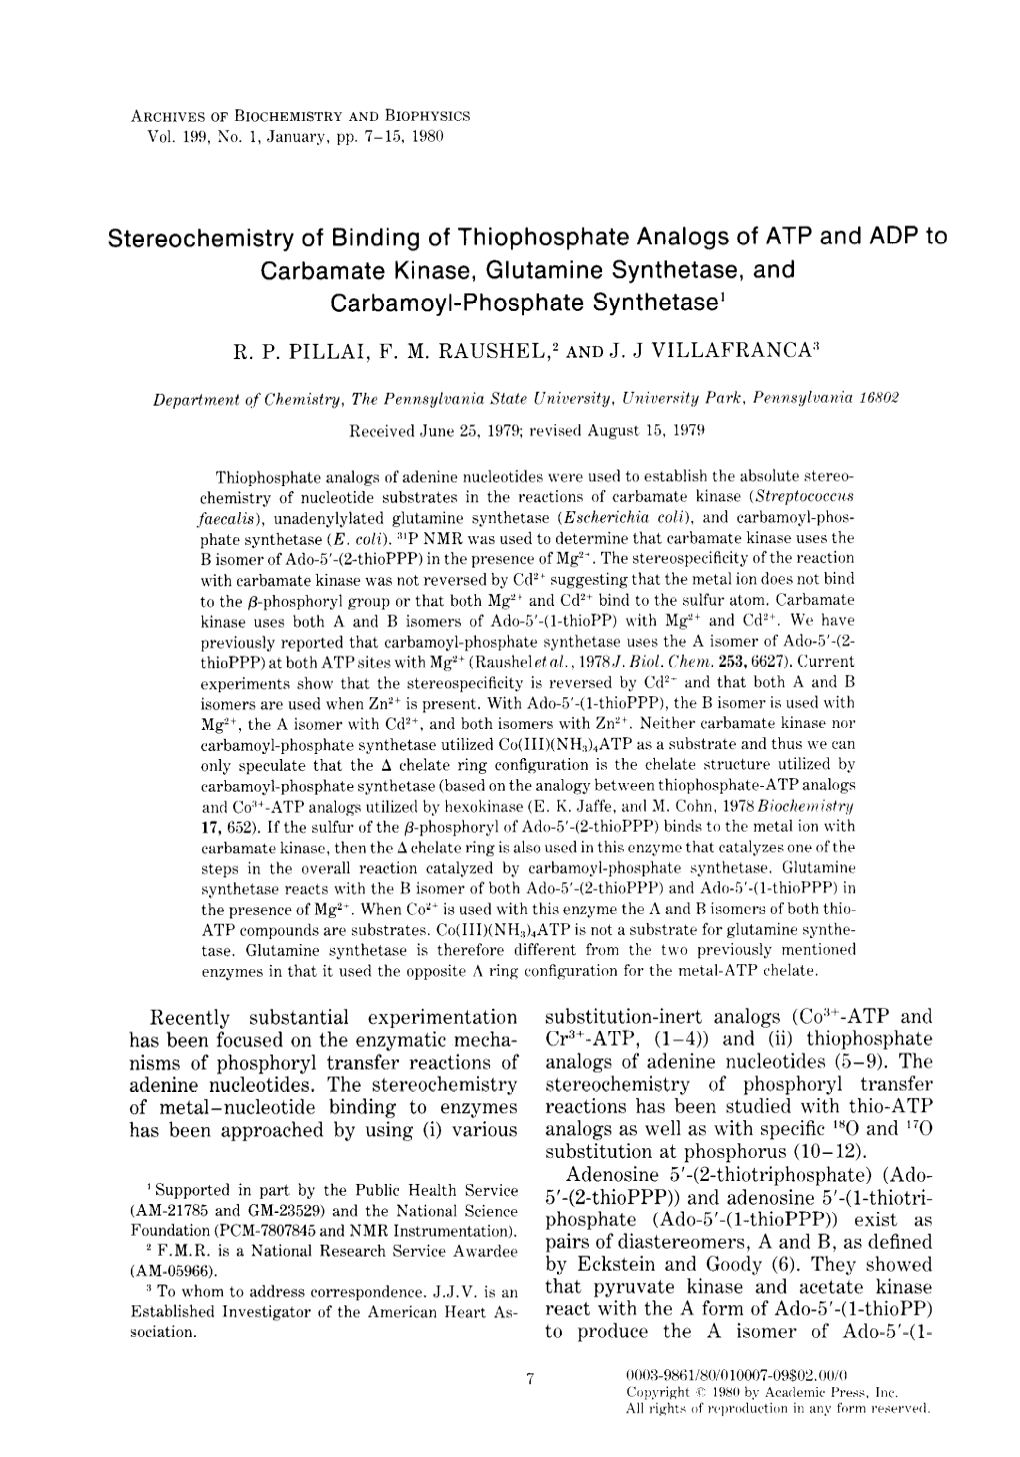 Stereochemistry of Binding of Thiophosphate Analogs of ATP and ADP to Carbamate Kinase, Glutamine Synthetase, and Carbamoyl-Phosphate Synthetase’